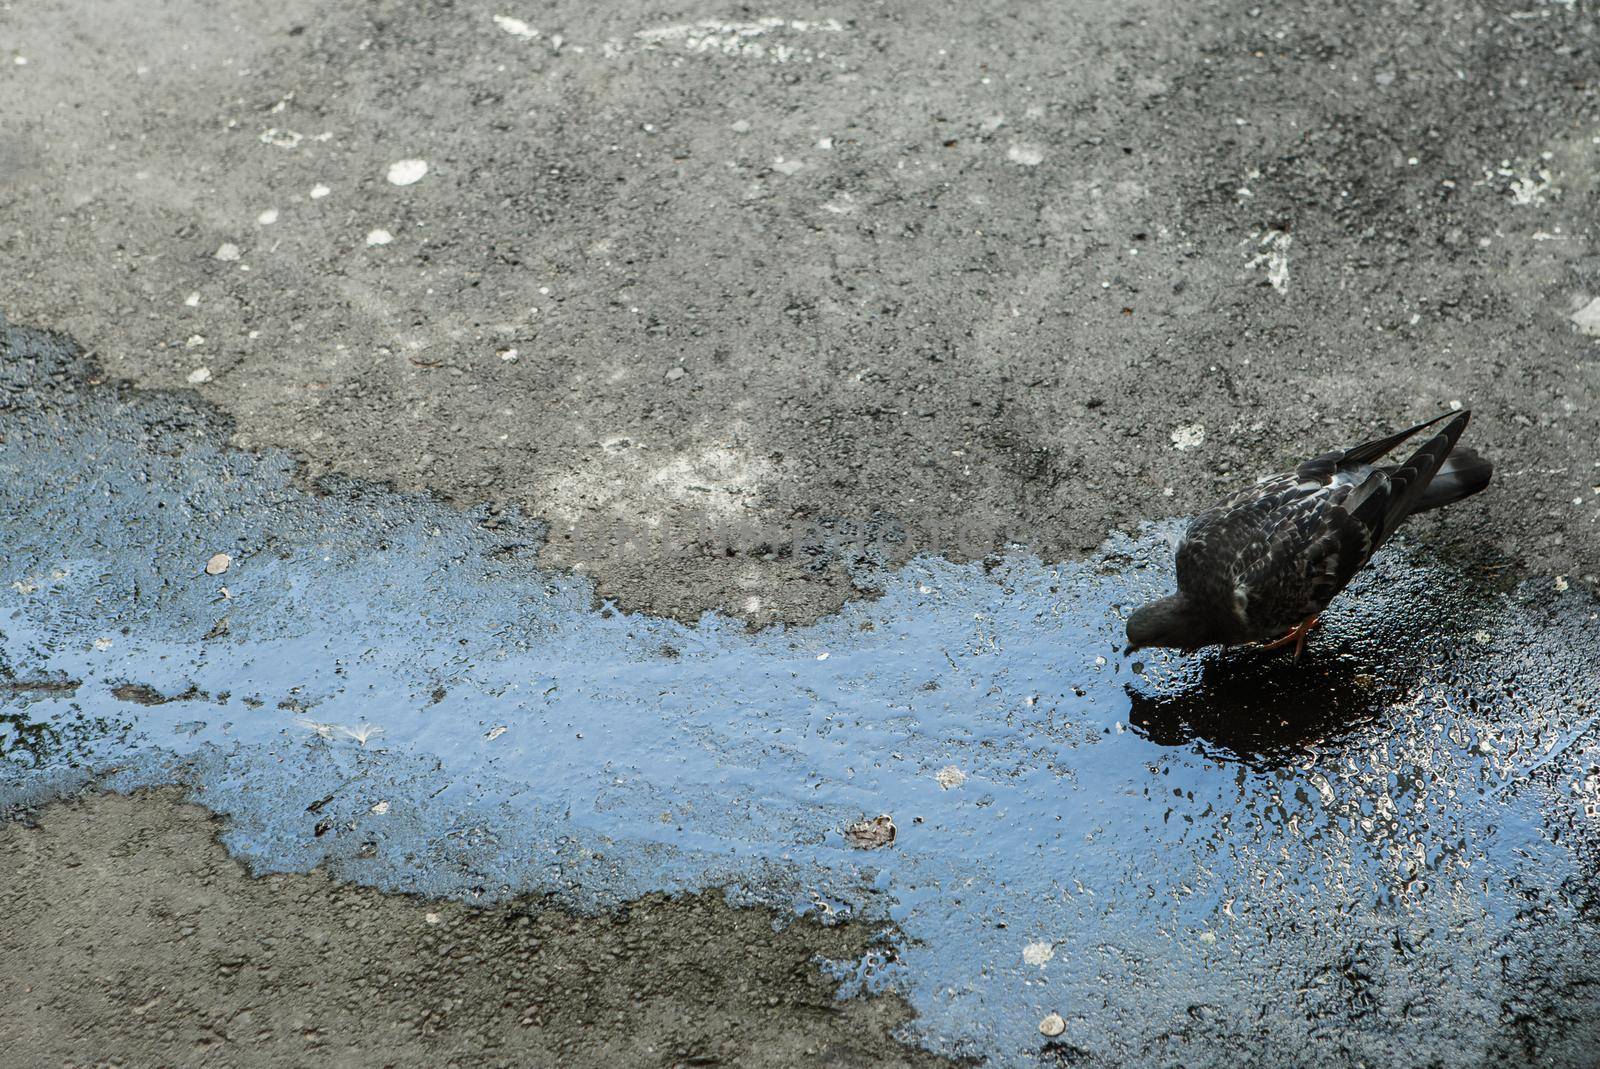 A pigeon drinking from a dirty puddle. by deandy